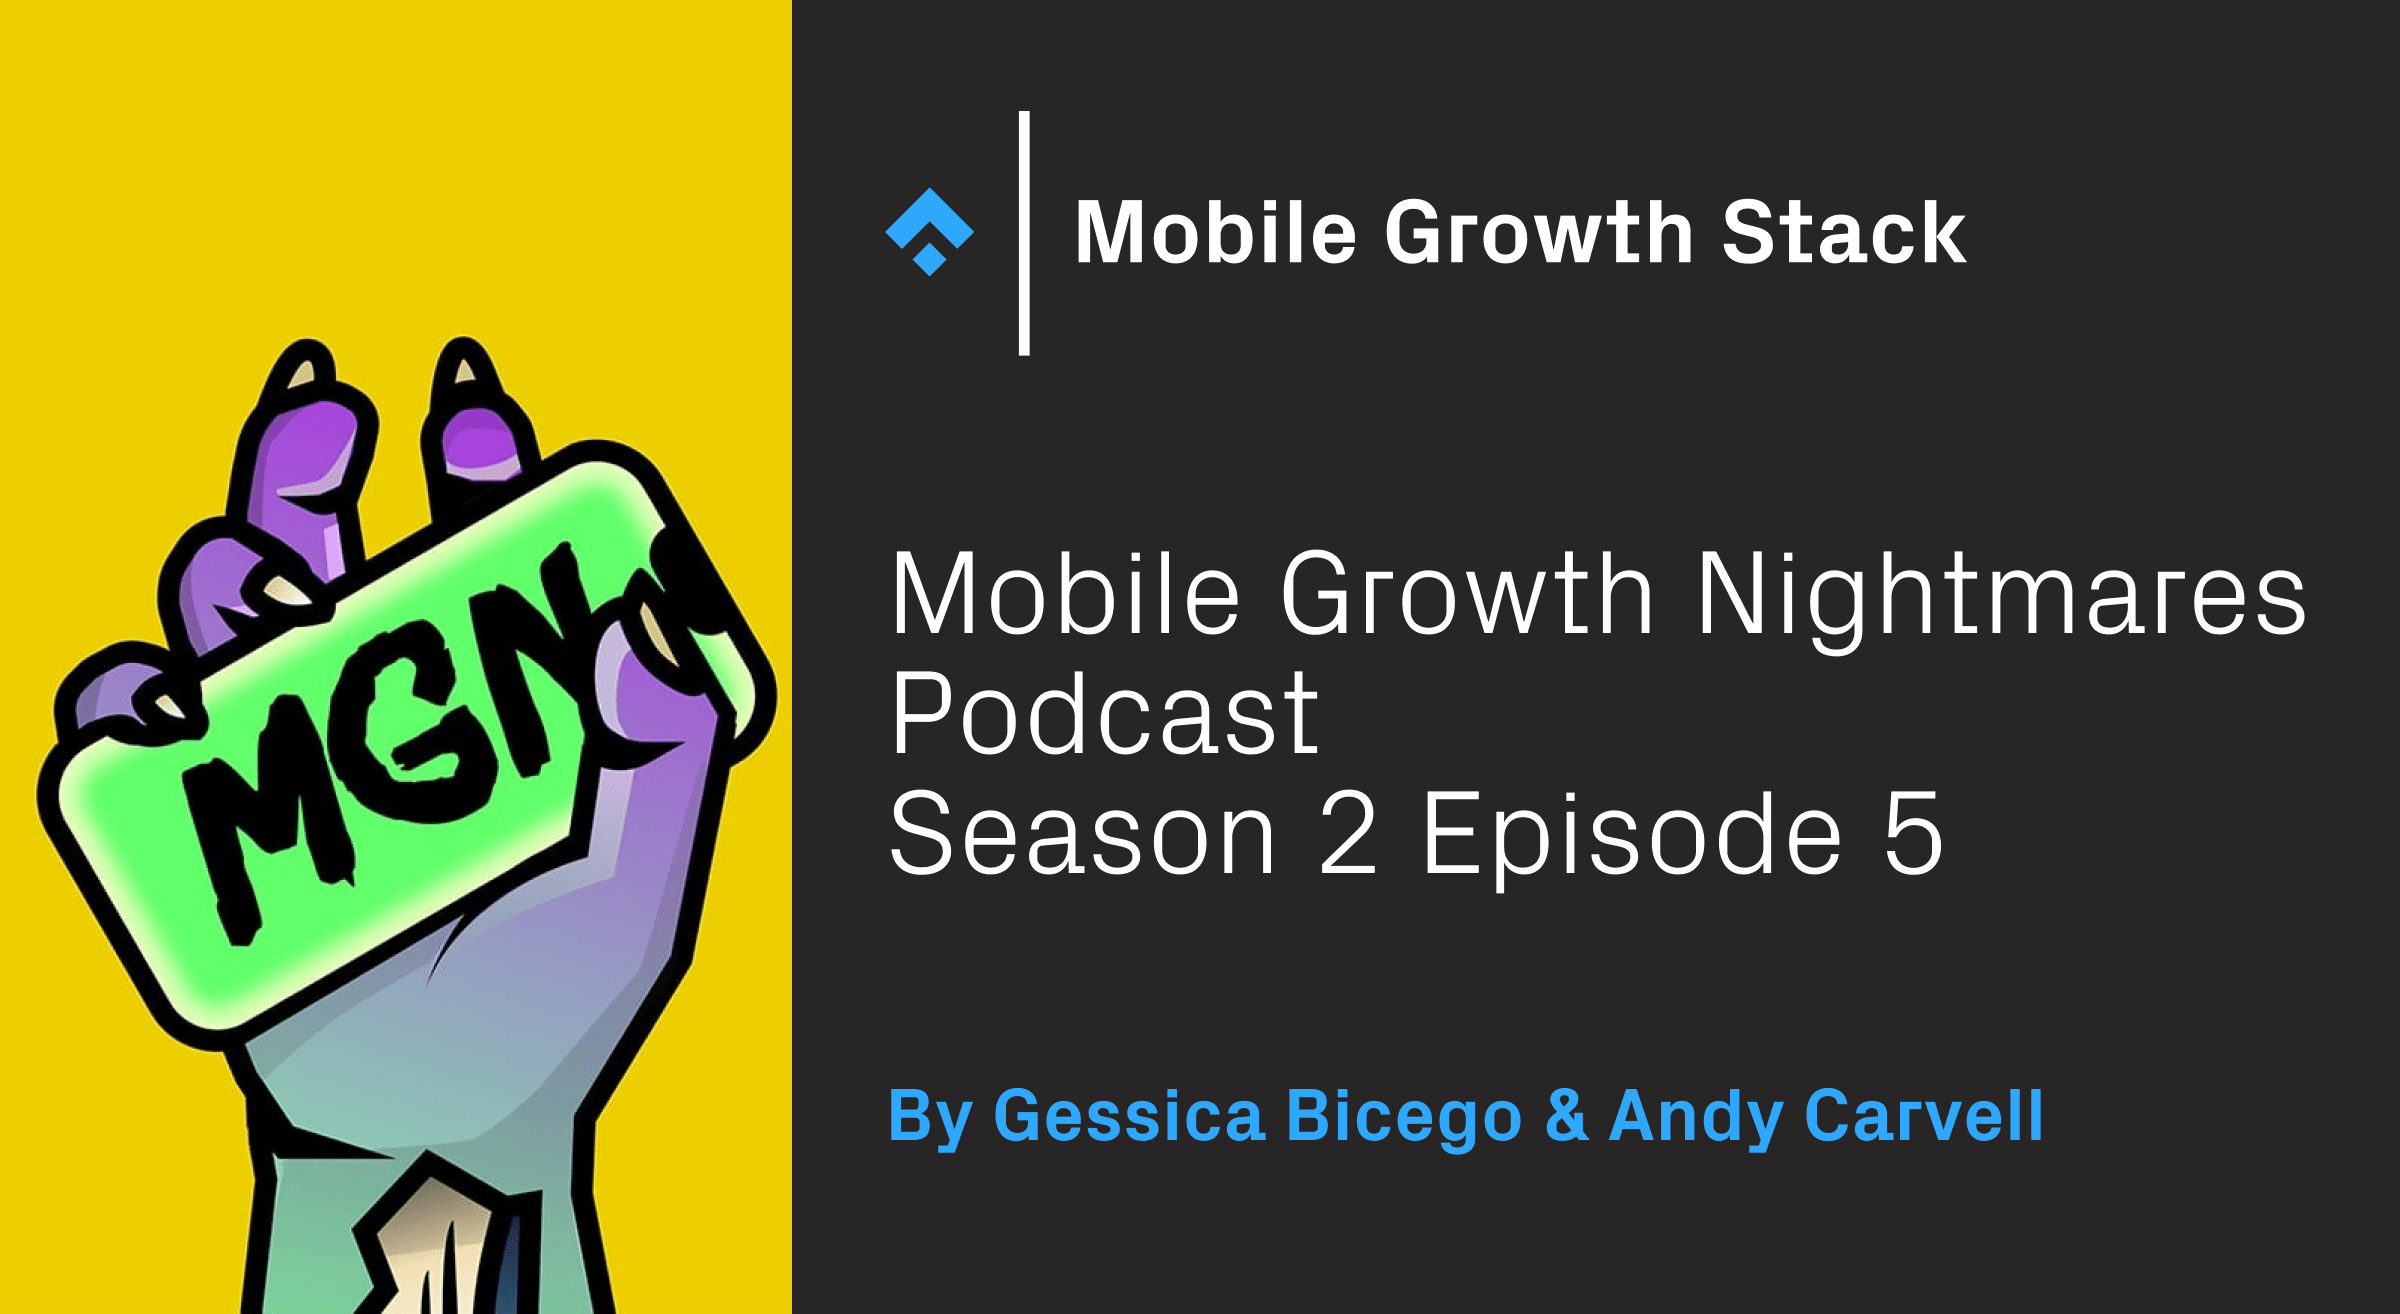 Mobile Growth Nightmares Episode 5